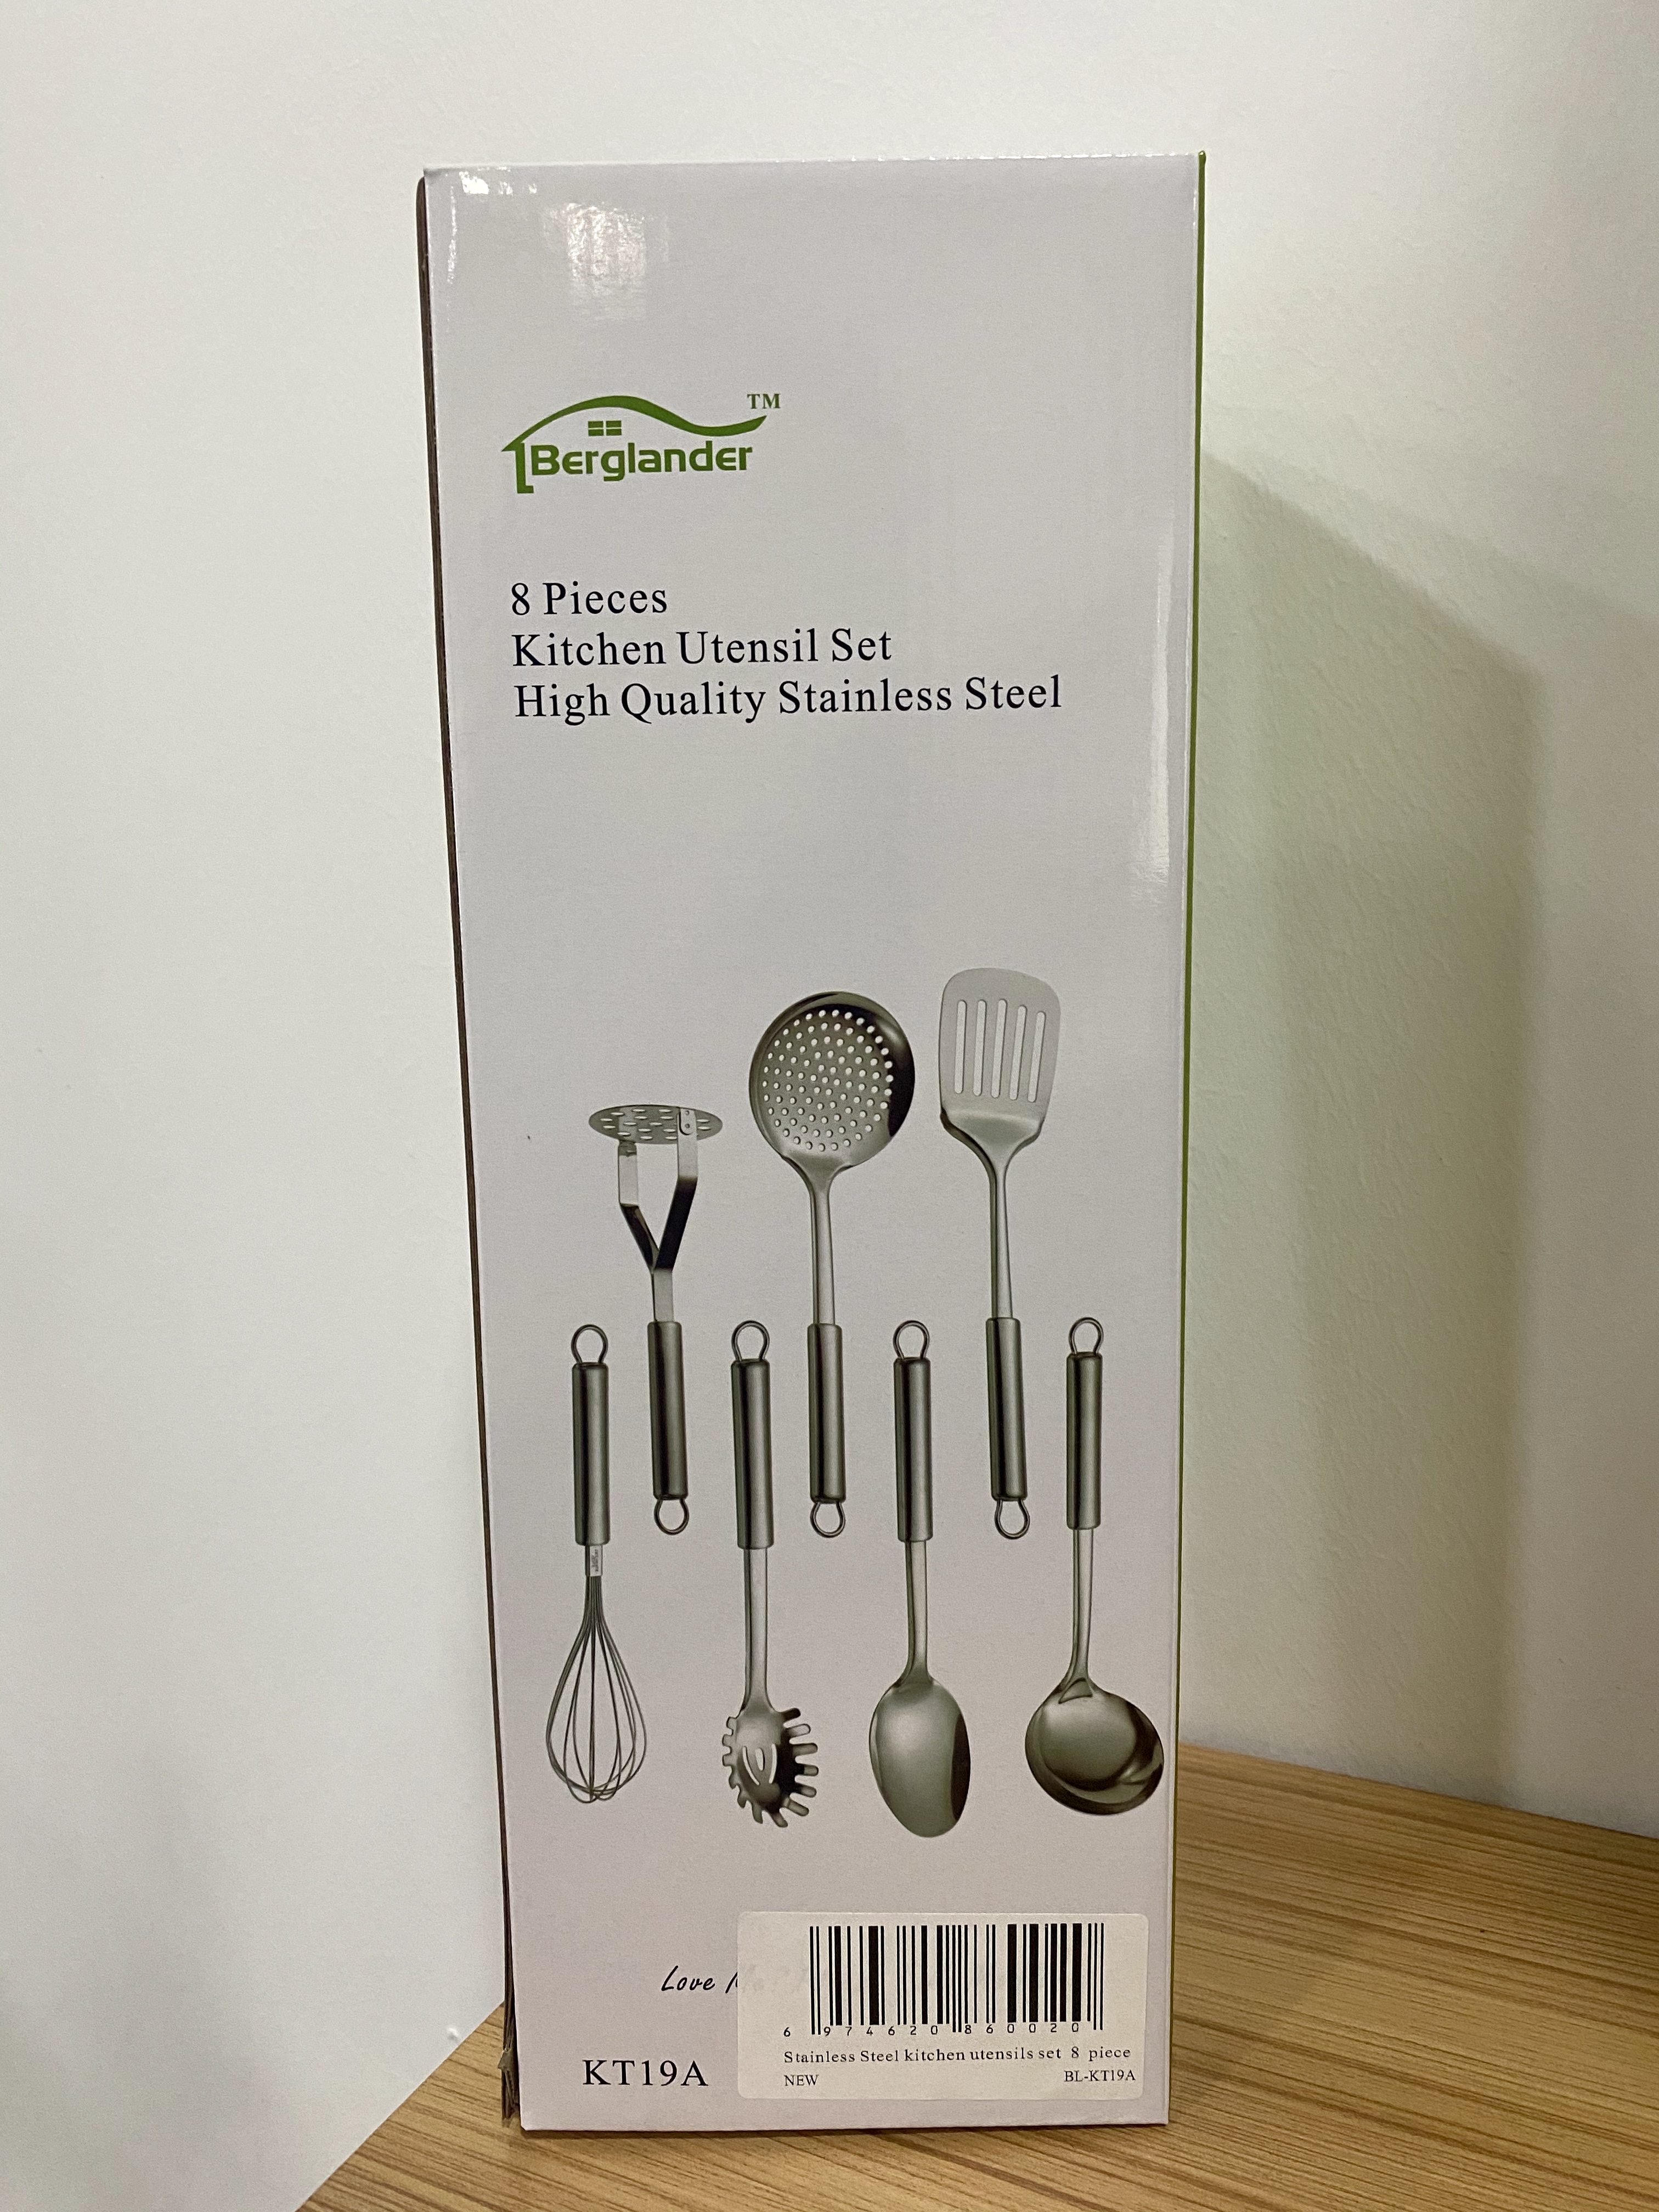 Berglander Cooking Utensil Set 8 Piece, Stainless Steel Kitchen Tool Set with Stand,Cooking Utensils, Slotted Tuner, Ladle, Skim